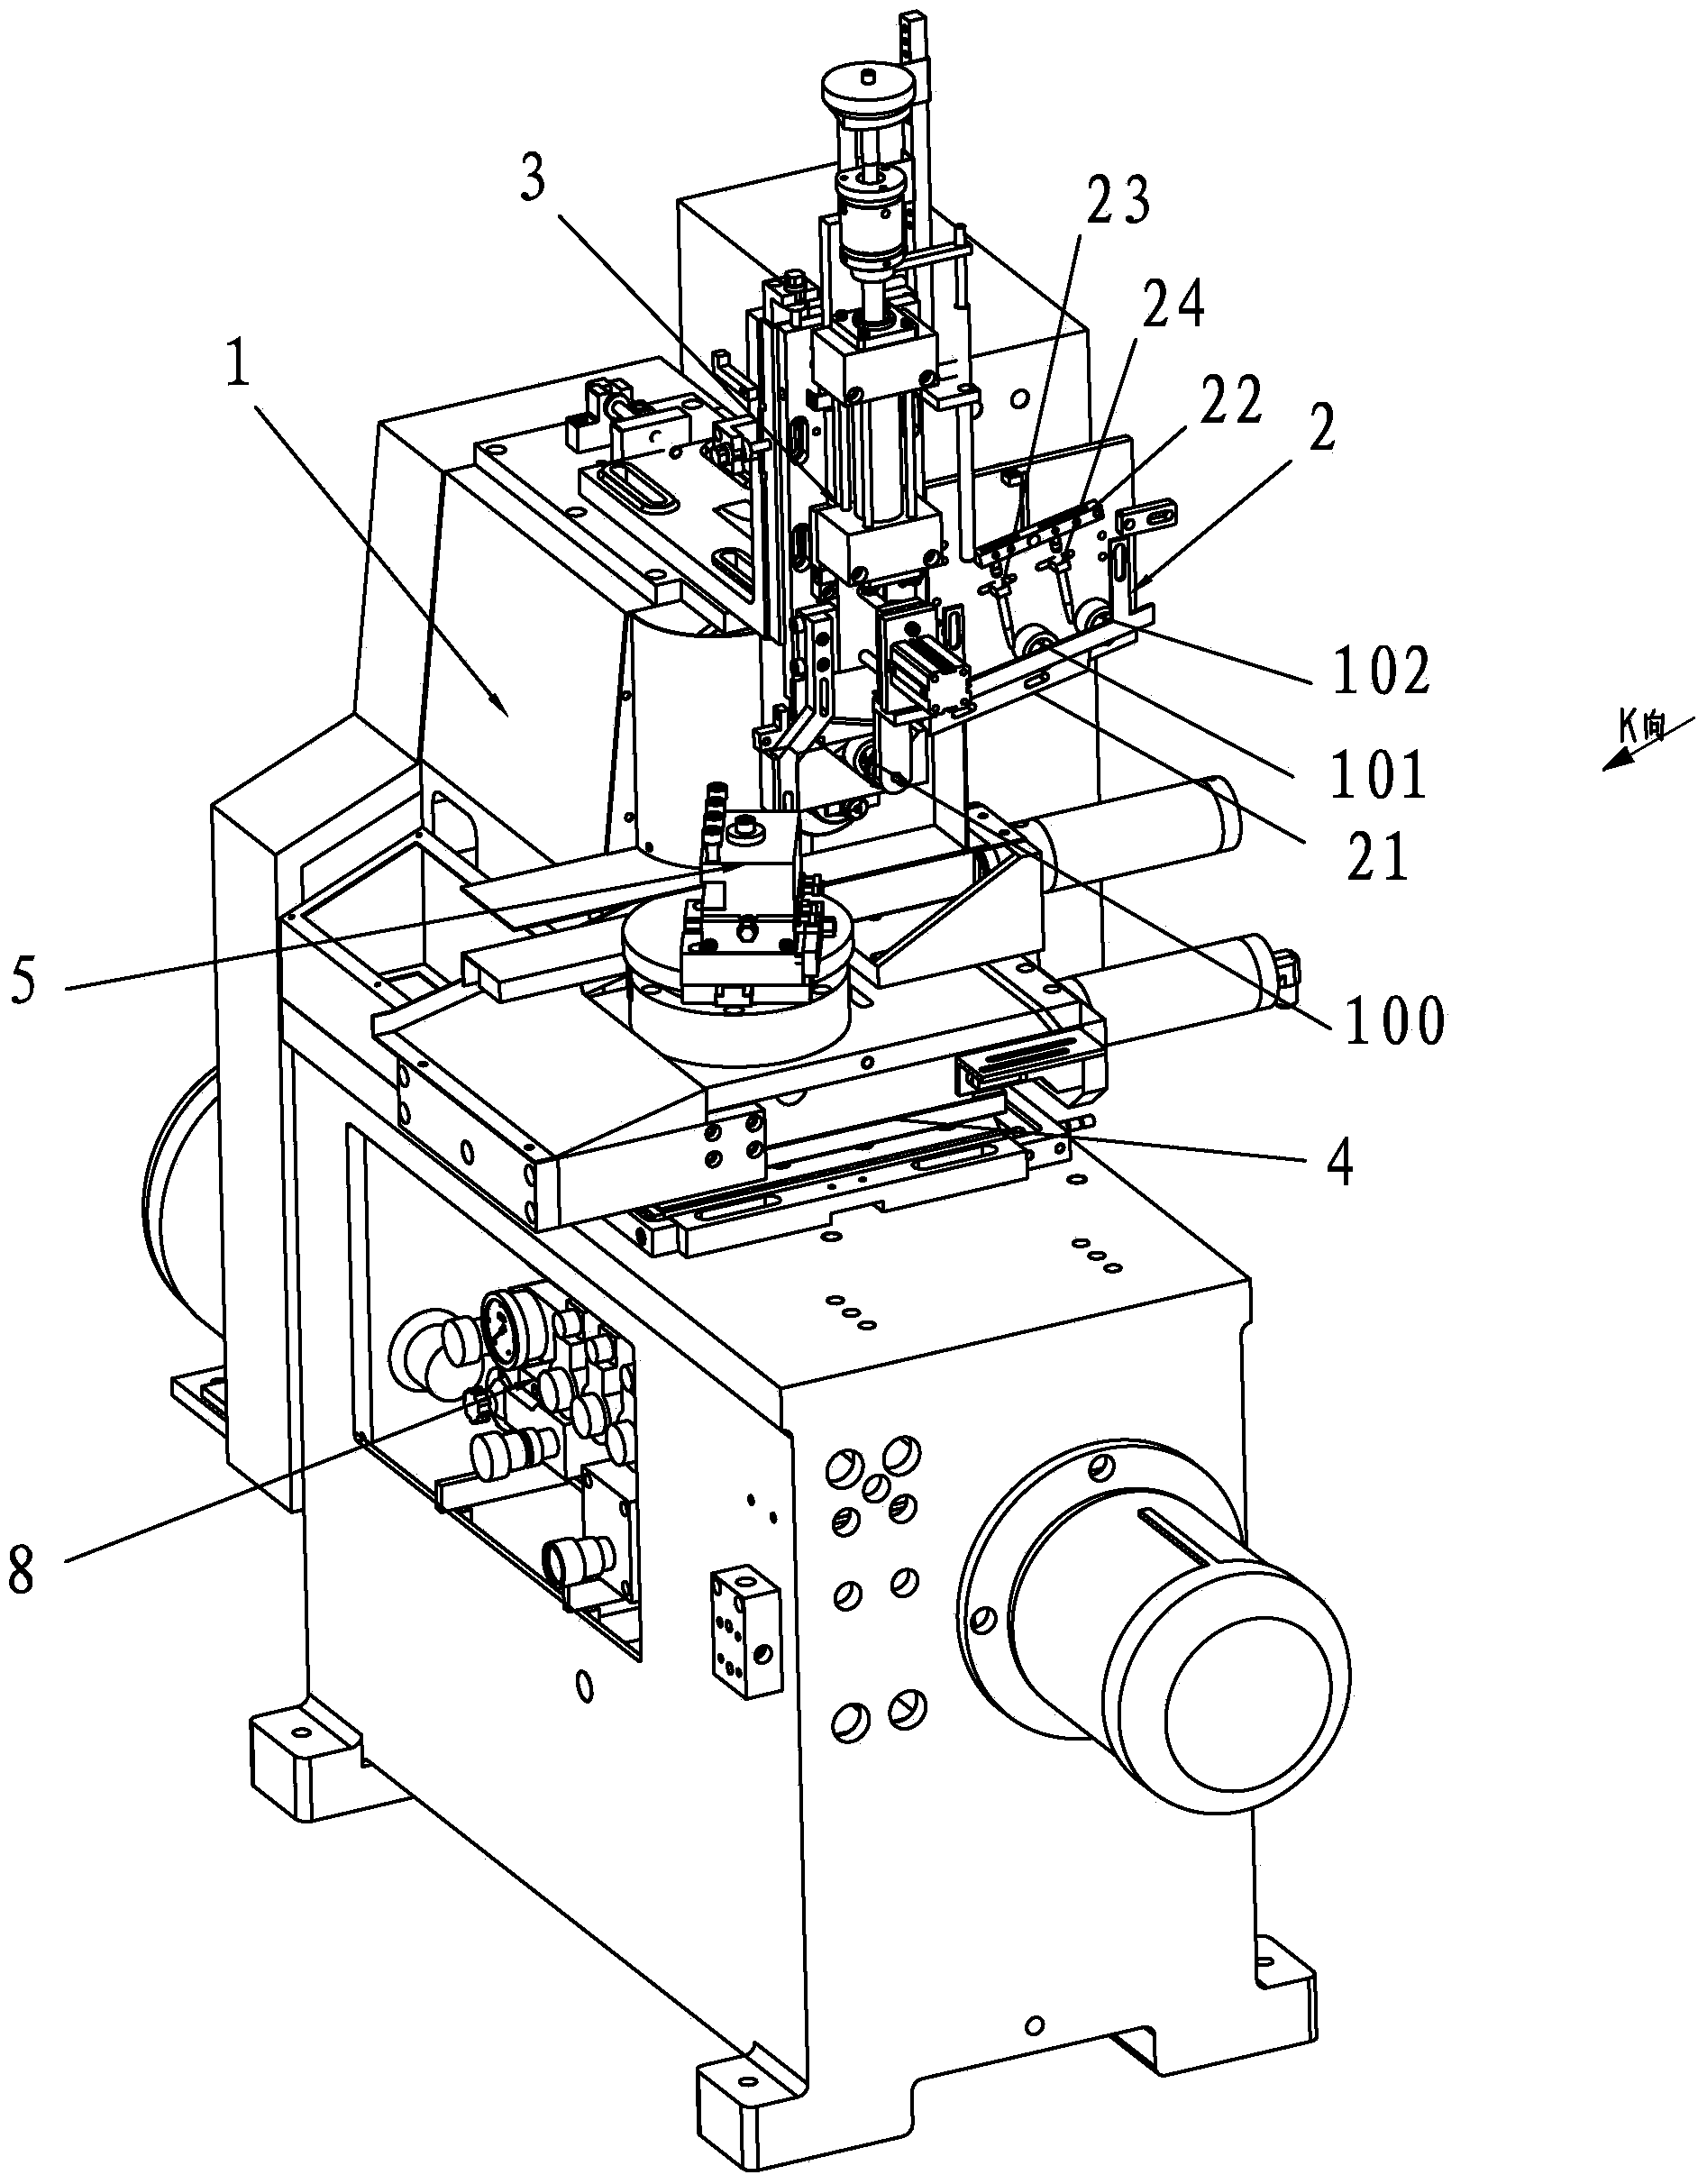 A spherical automatic machine tool